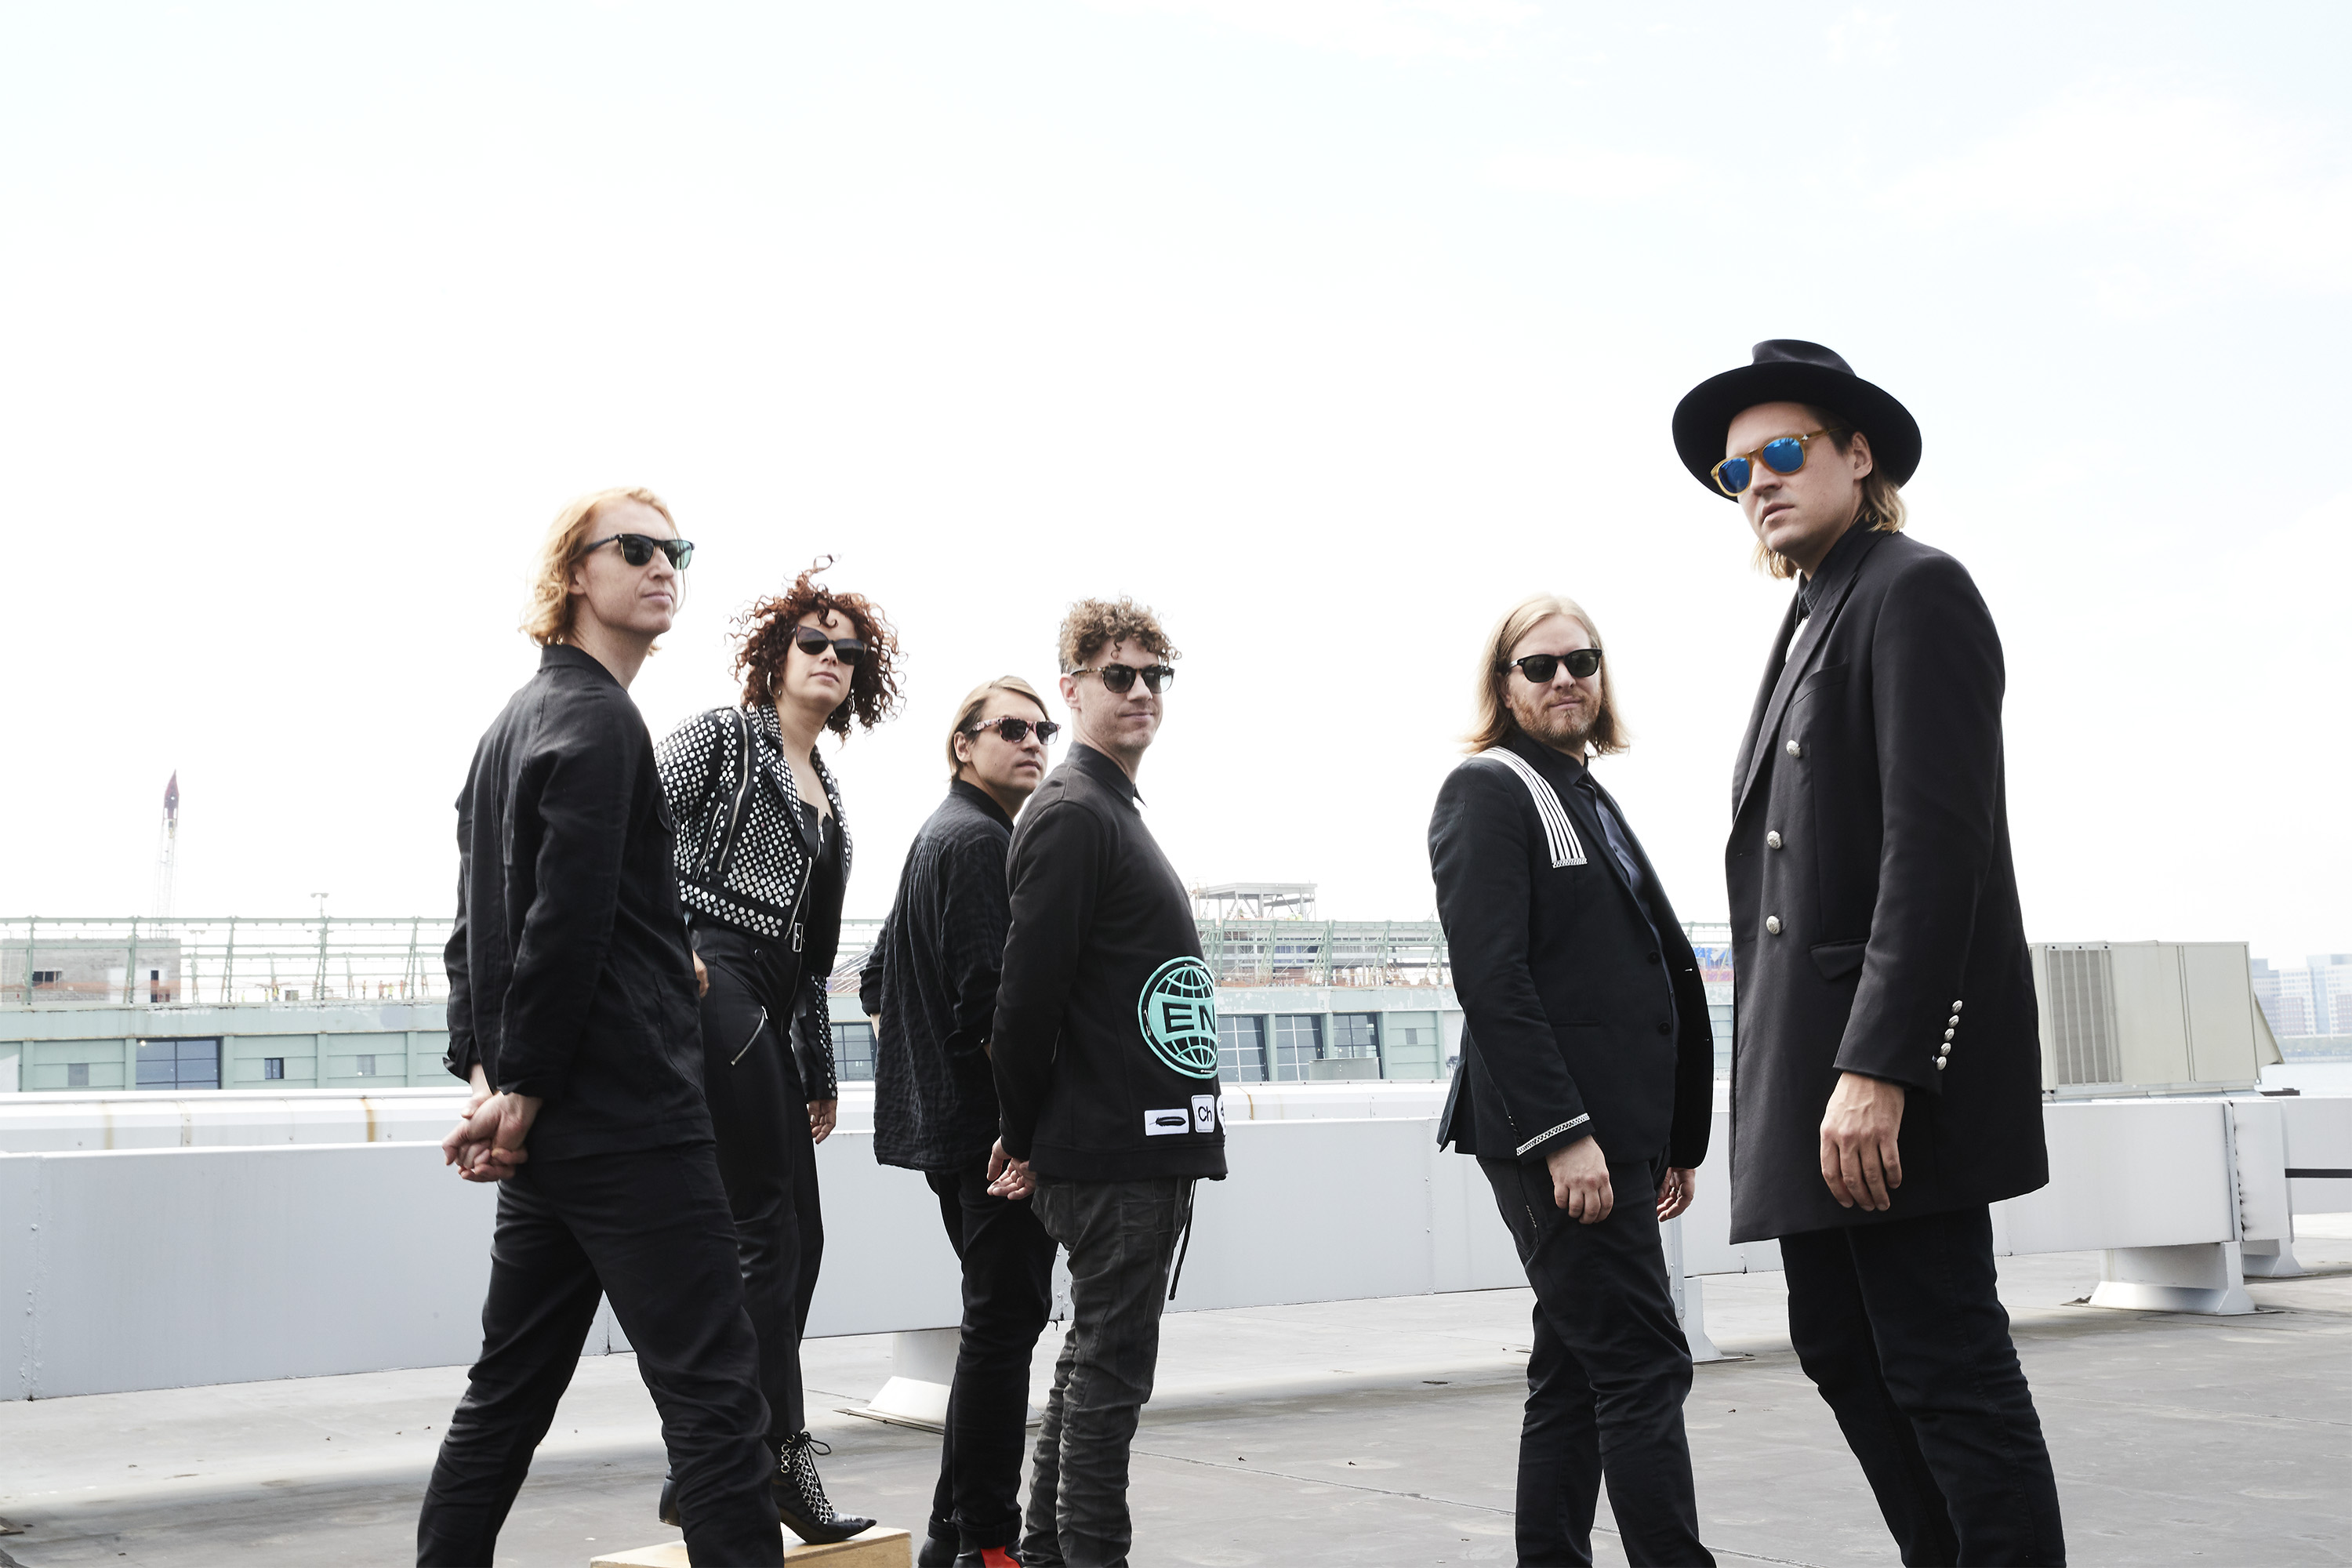 ARCADE FIRE: EVERYTHING NOW CONTINUED - SIX NEW HEADLINE DATES ADDED